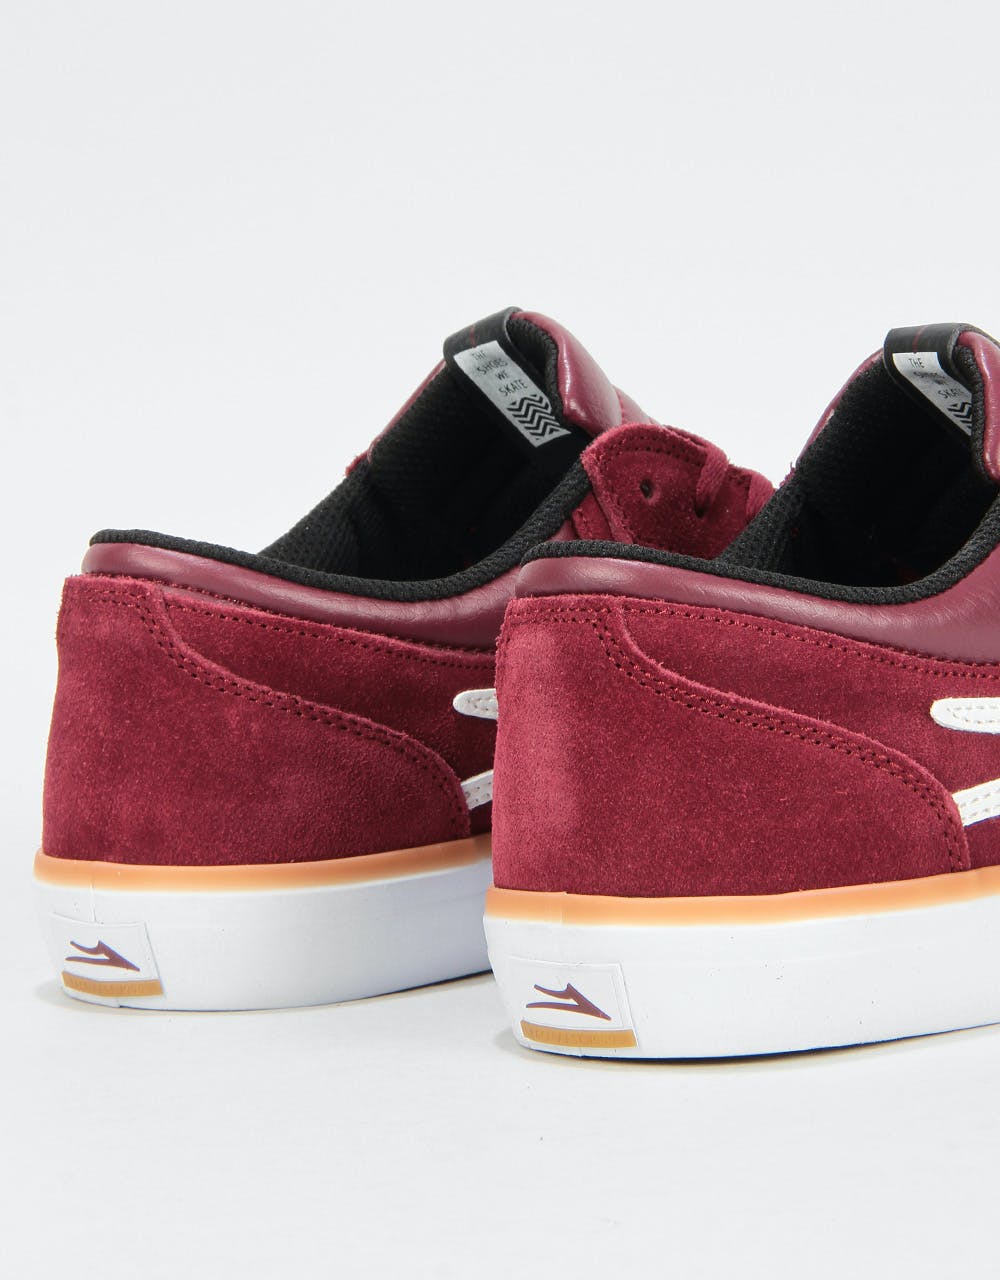 Lakai Griffin Skate Shoes - Burgundy Suede